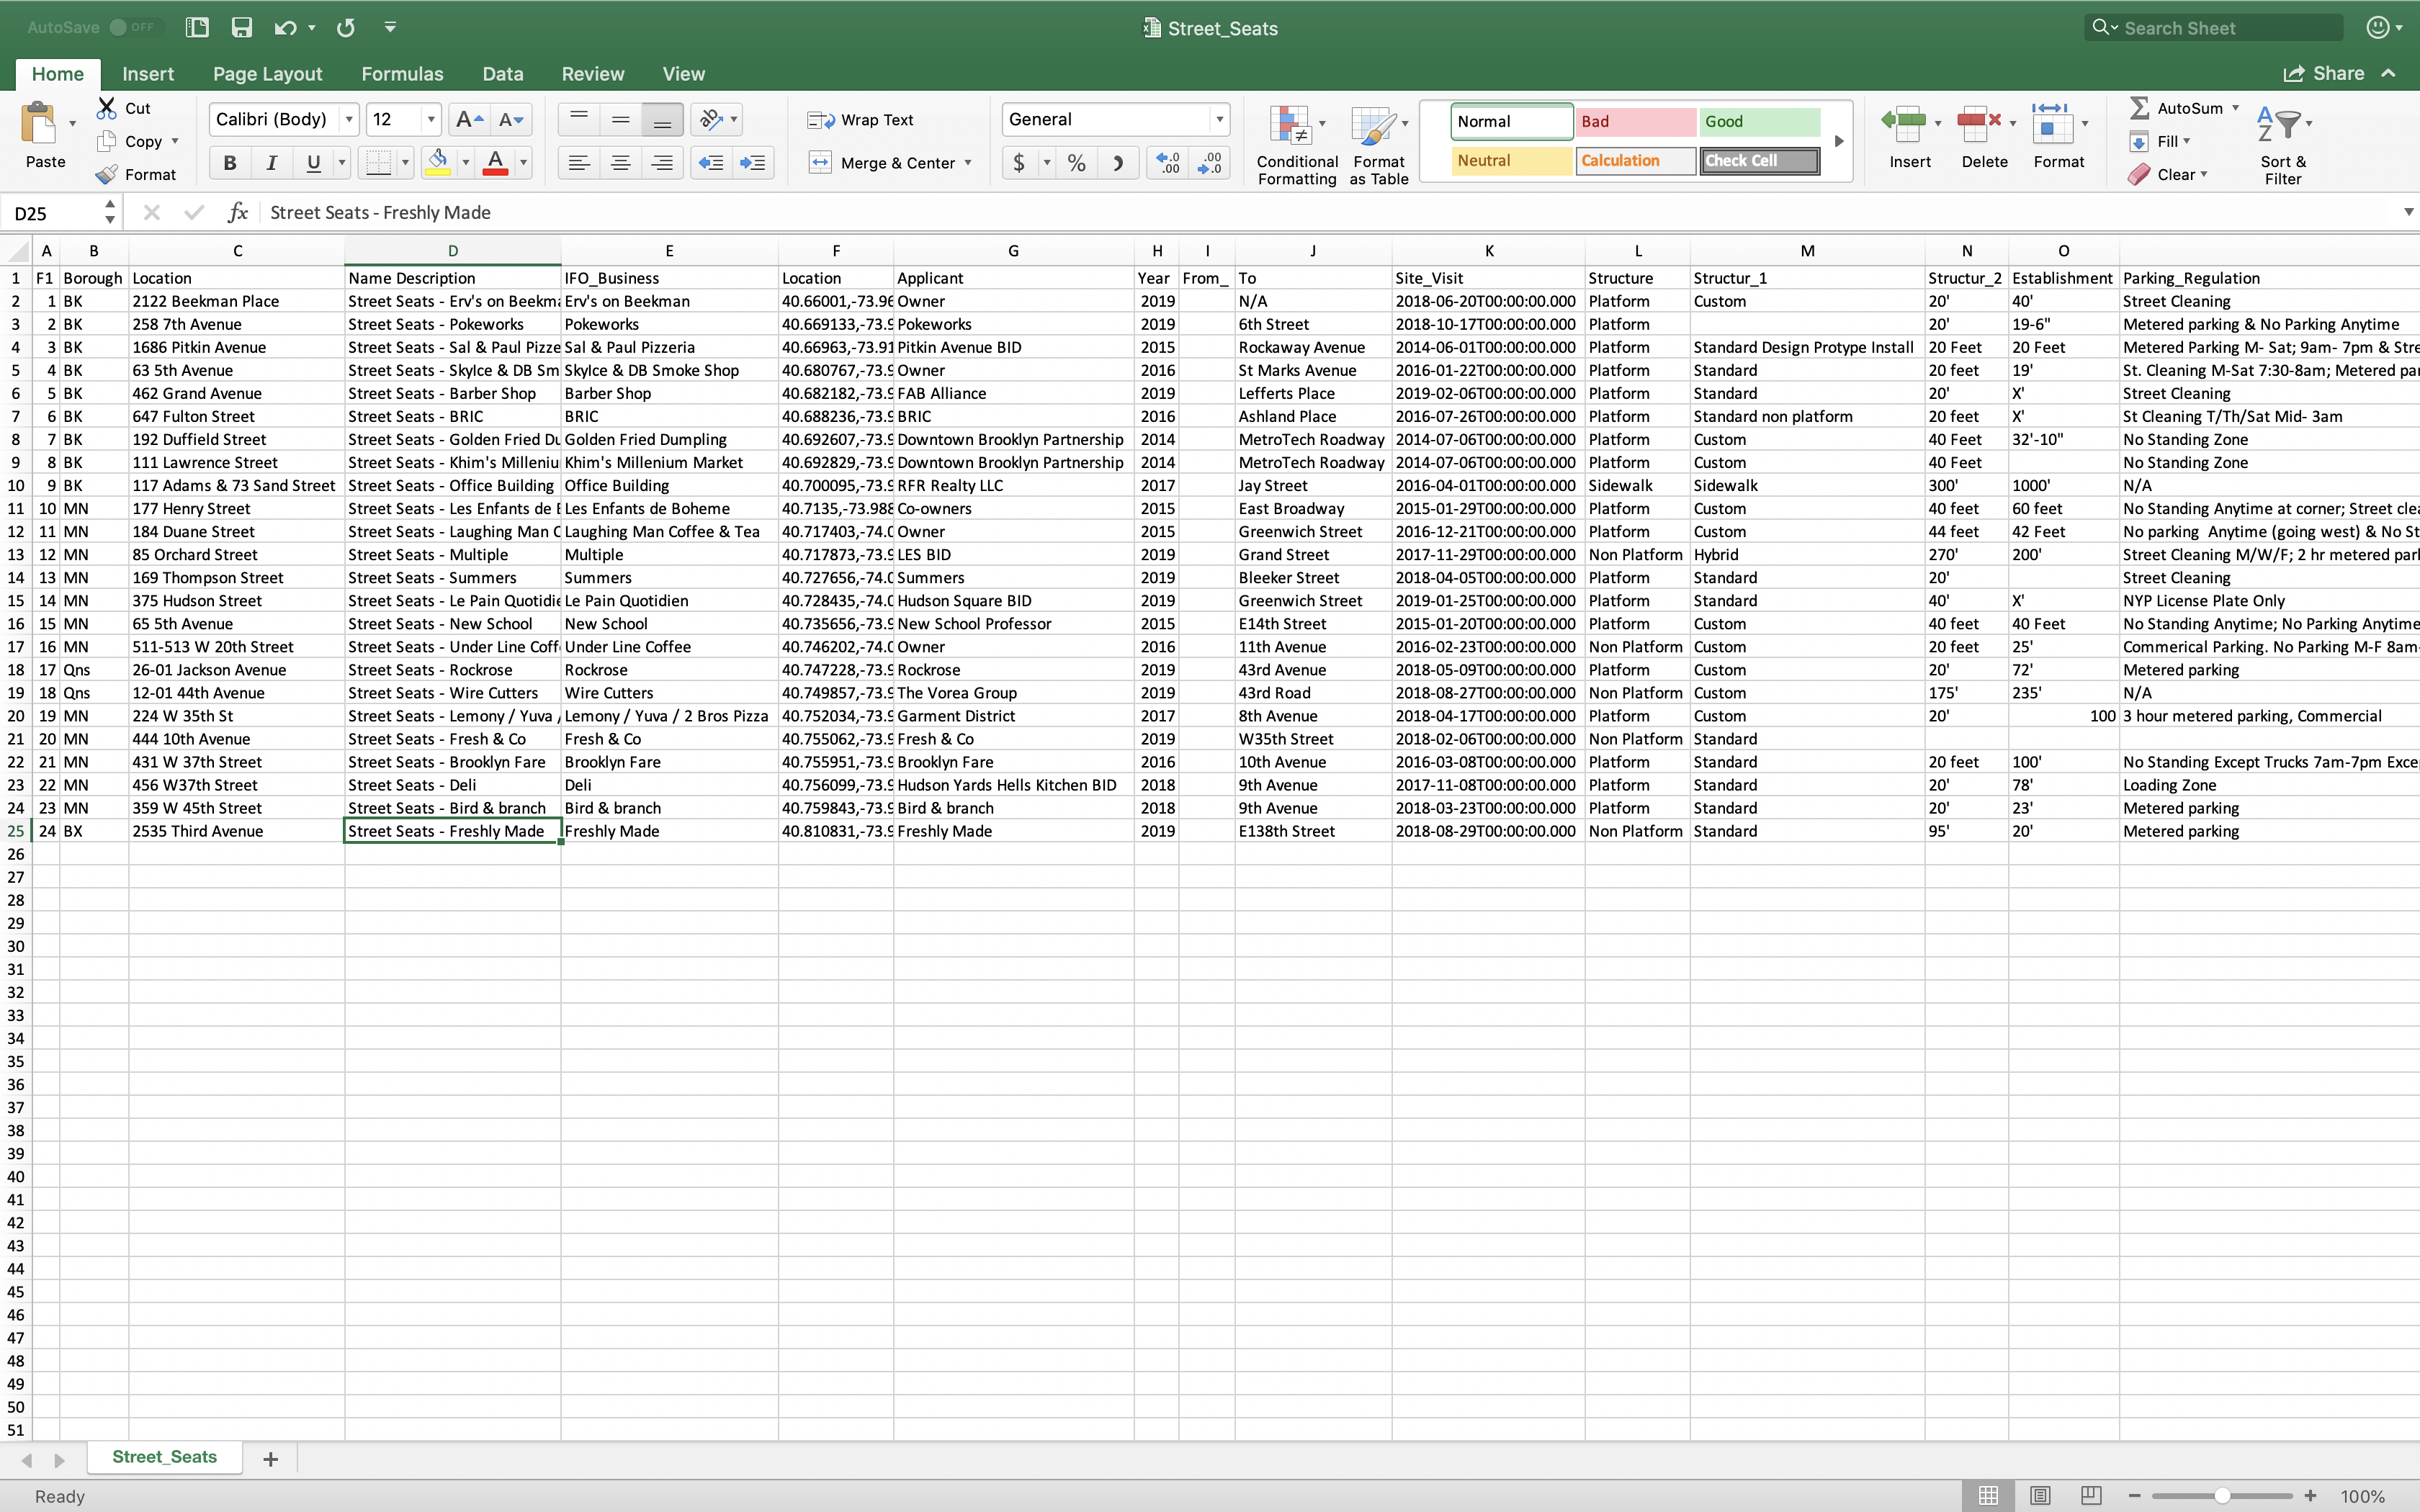 NYC Open Data's Street Seat Database imported into Excel